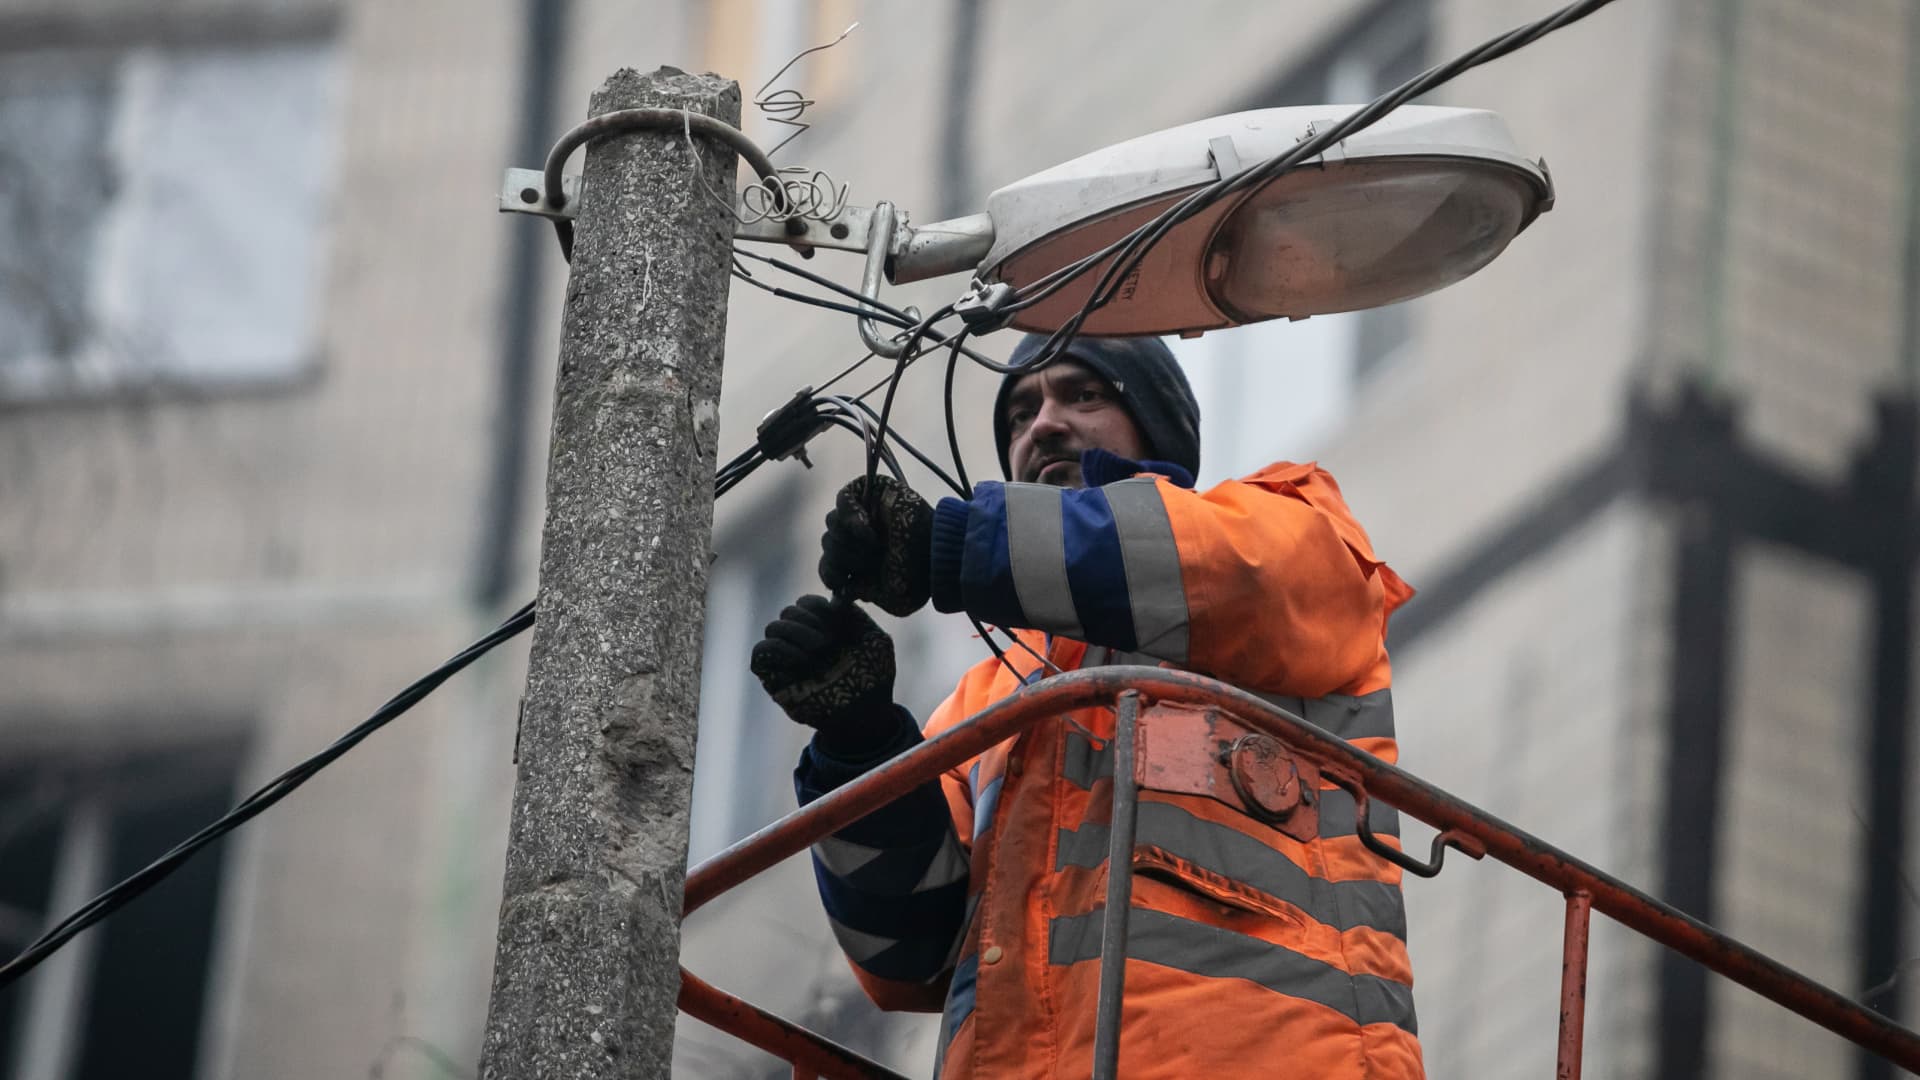 Utility man on the platform of a cherry picker truck repairs electricity on January 15, 2023 in Dnipro, Ukraine.